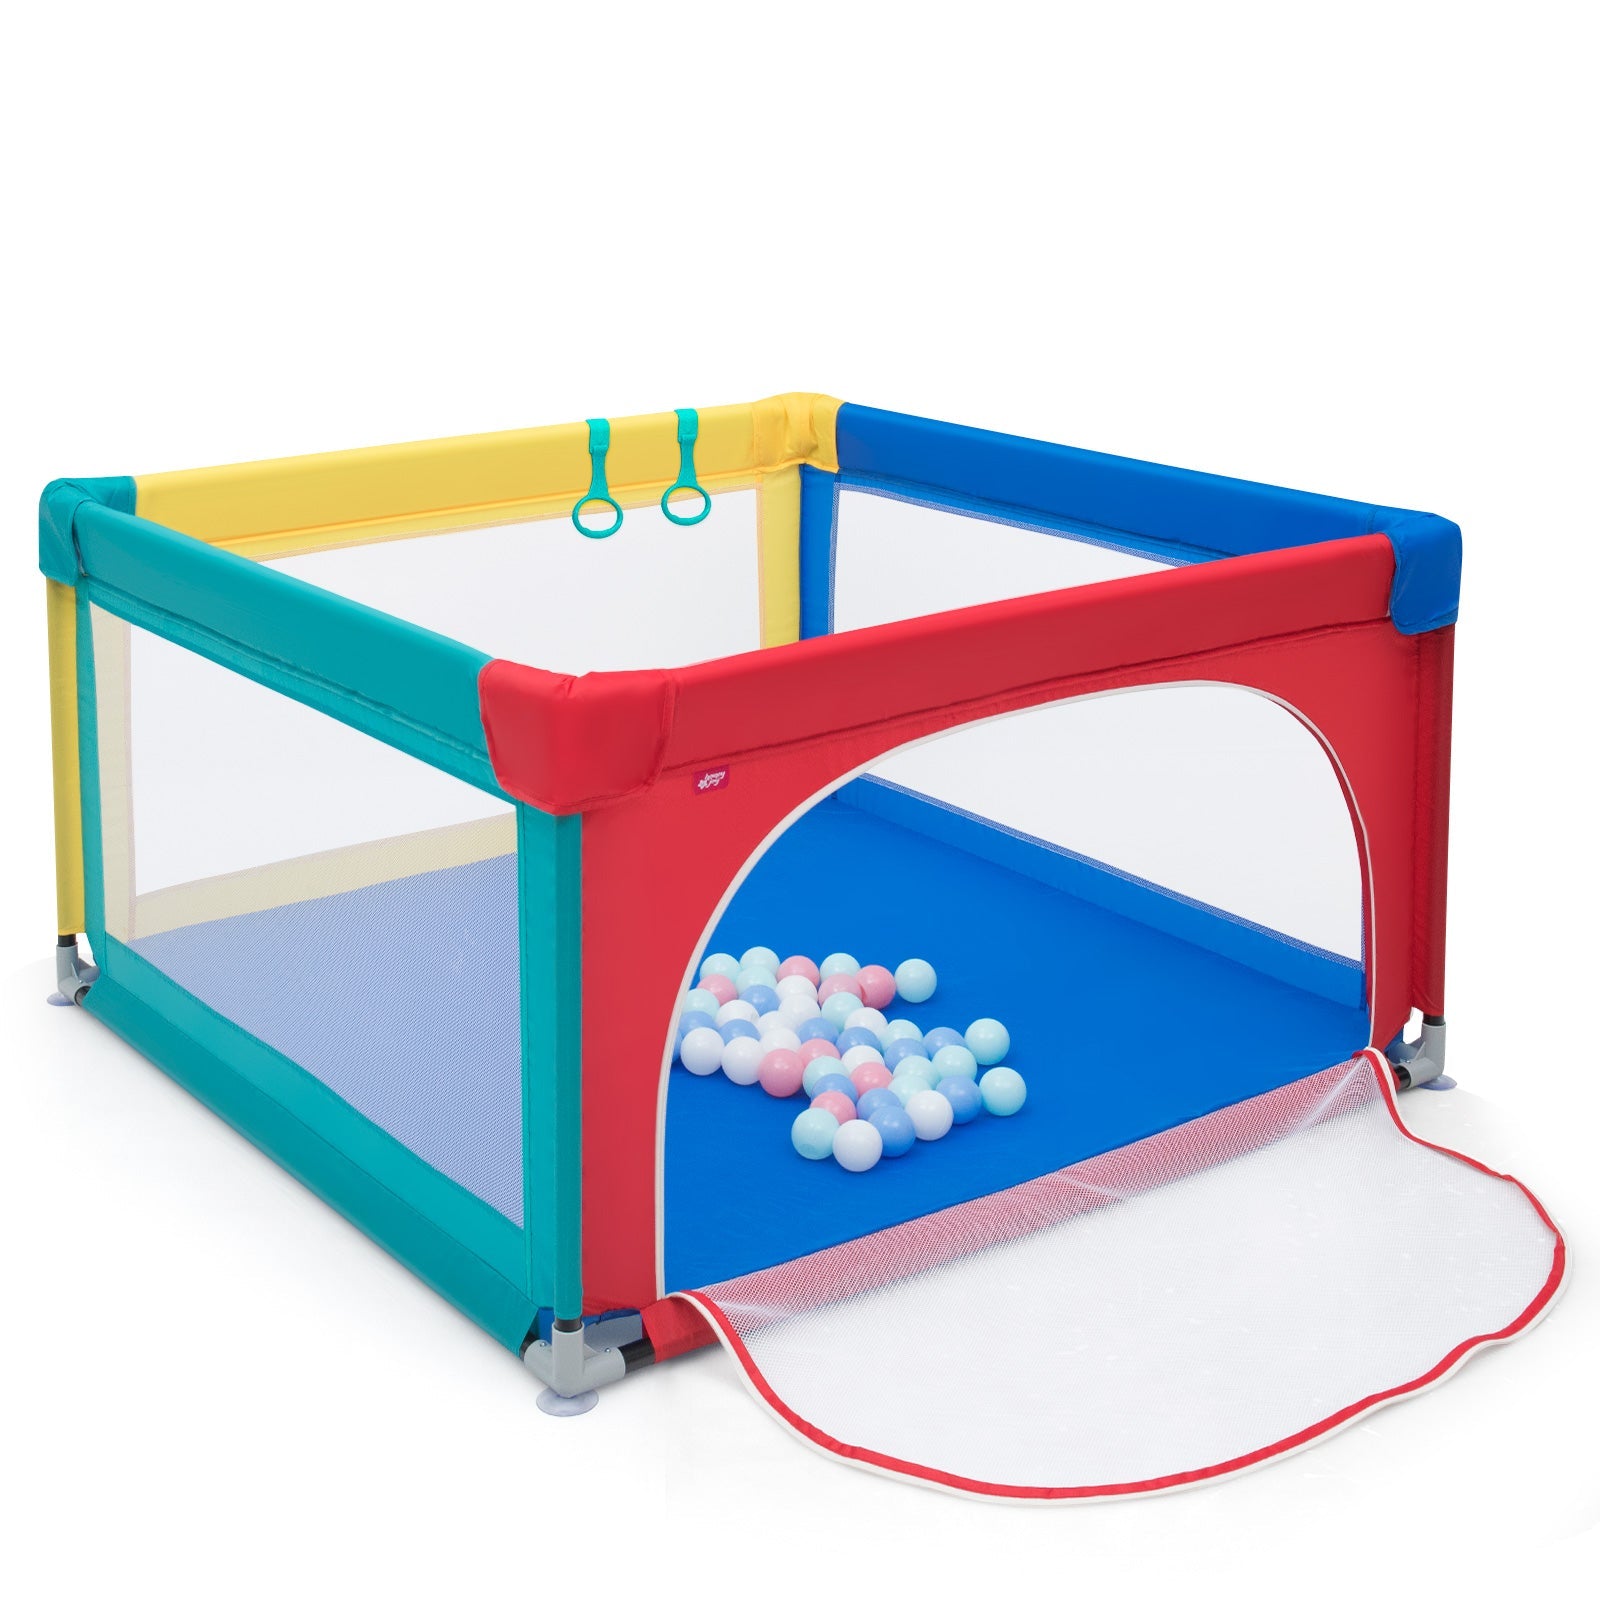 Multicolour Baby Playpen for Toddlers: Safety Activity Fence with 50 Ocean Balls